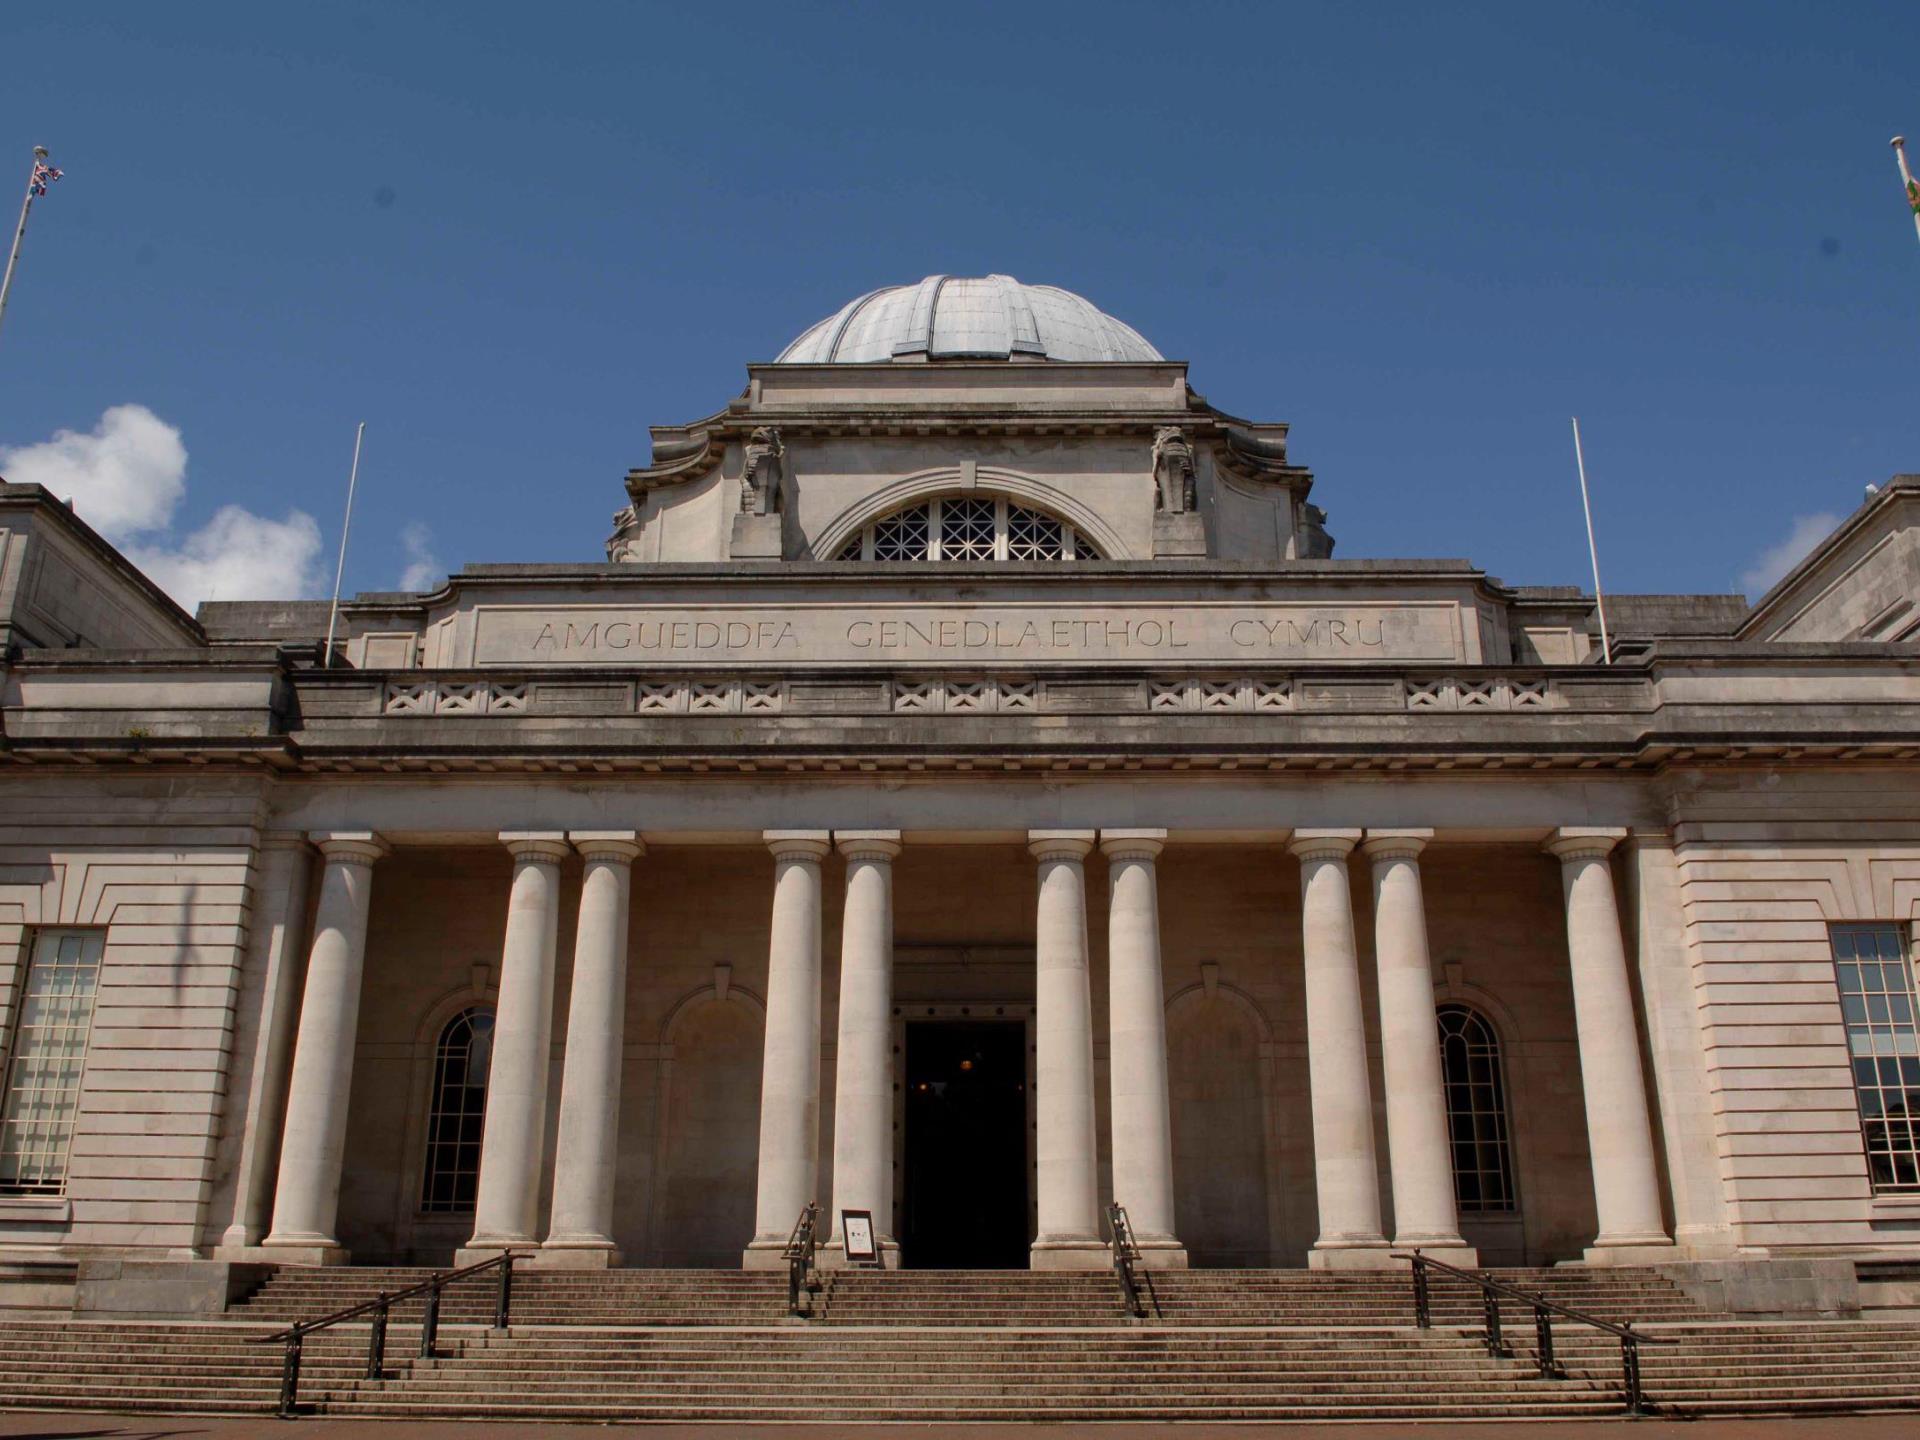 National Museum Cardiff